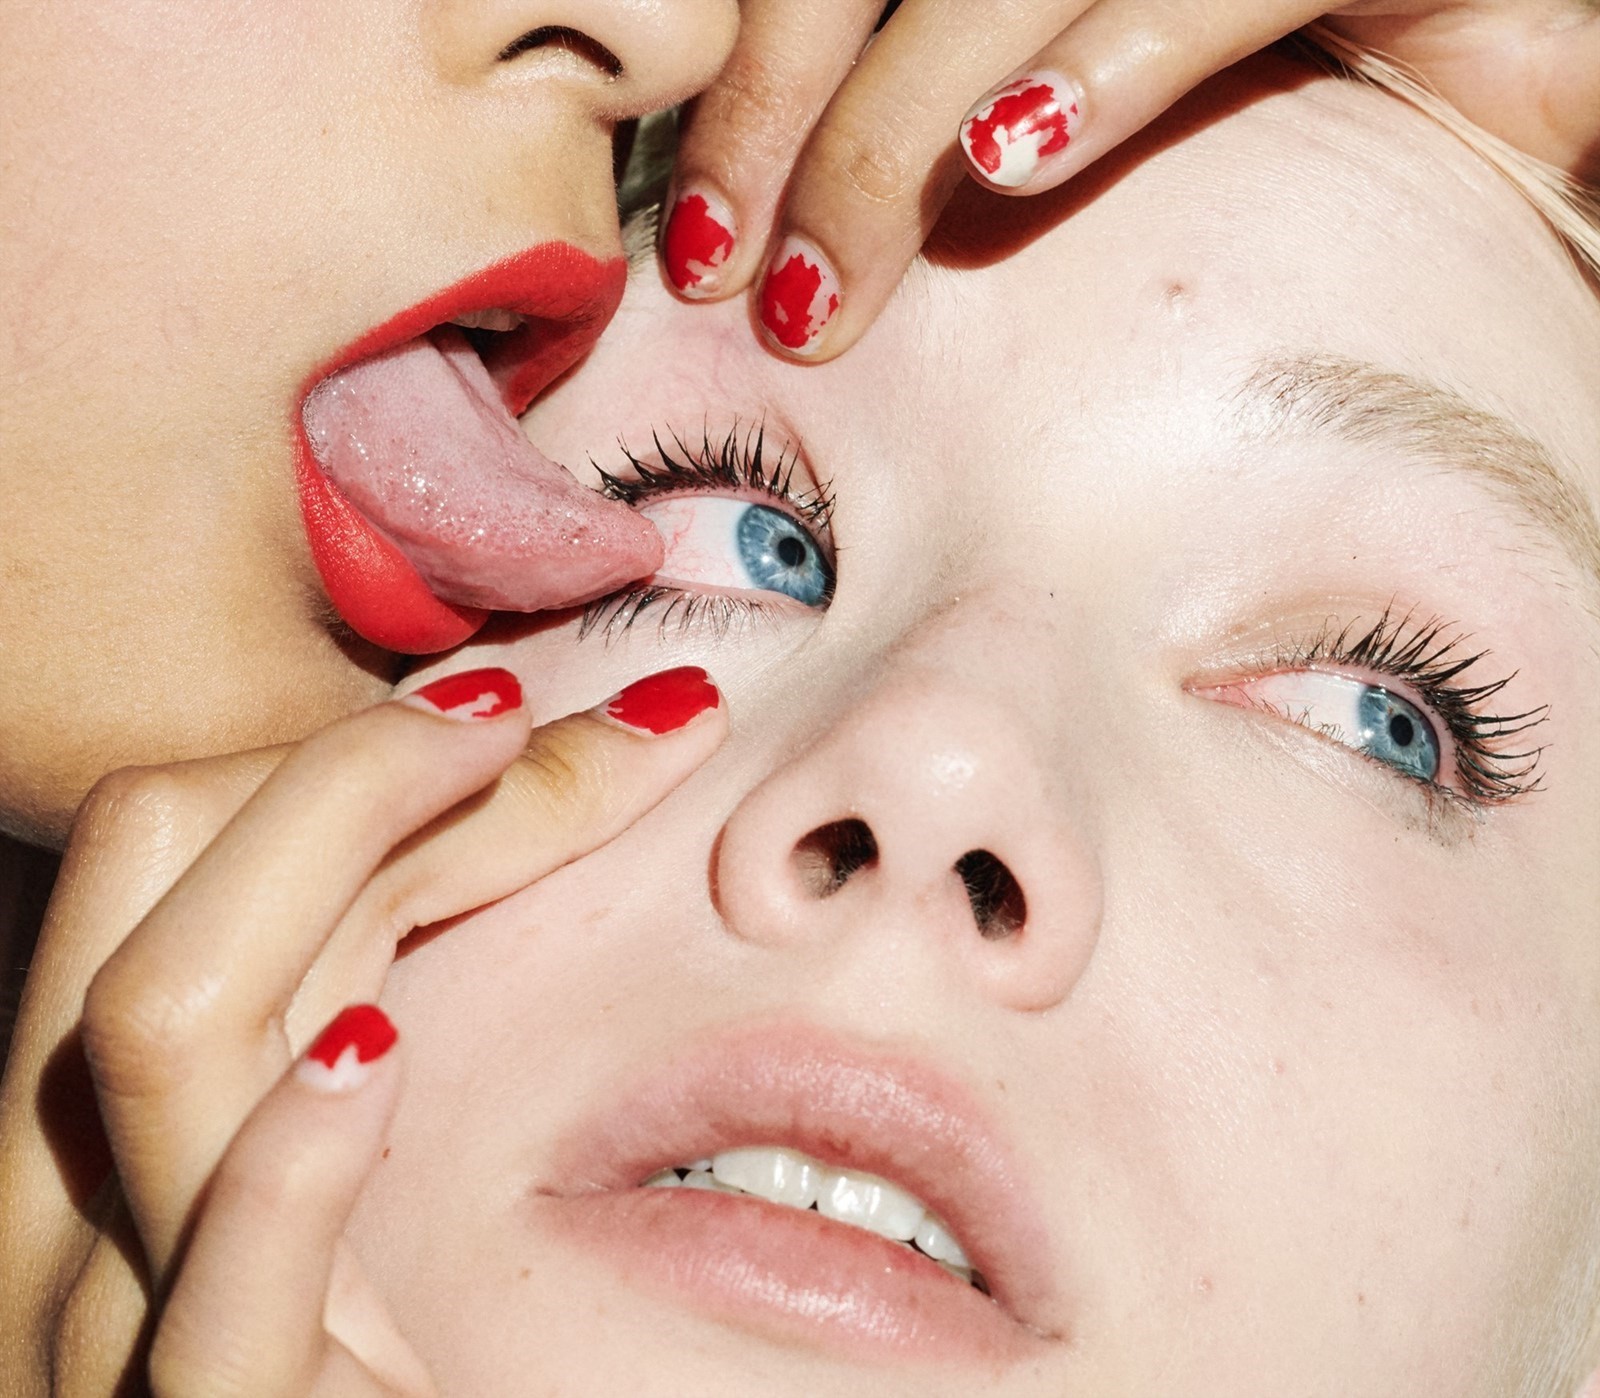 We speak to the people who get off on licking eye balls Dazed picture